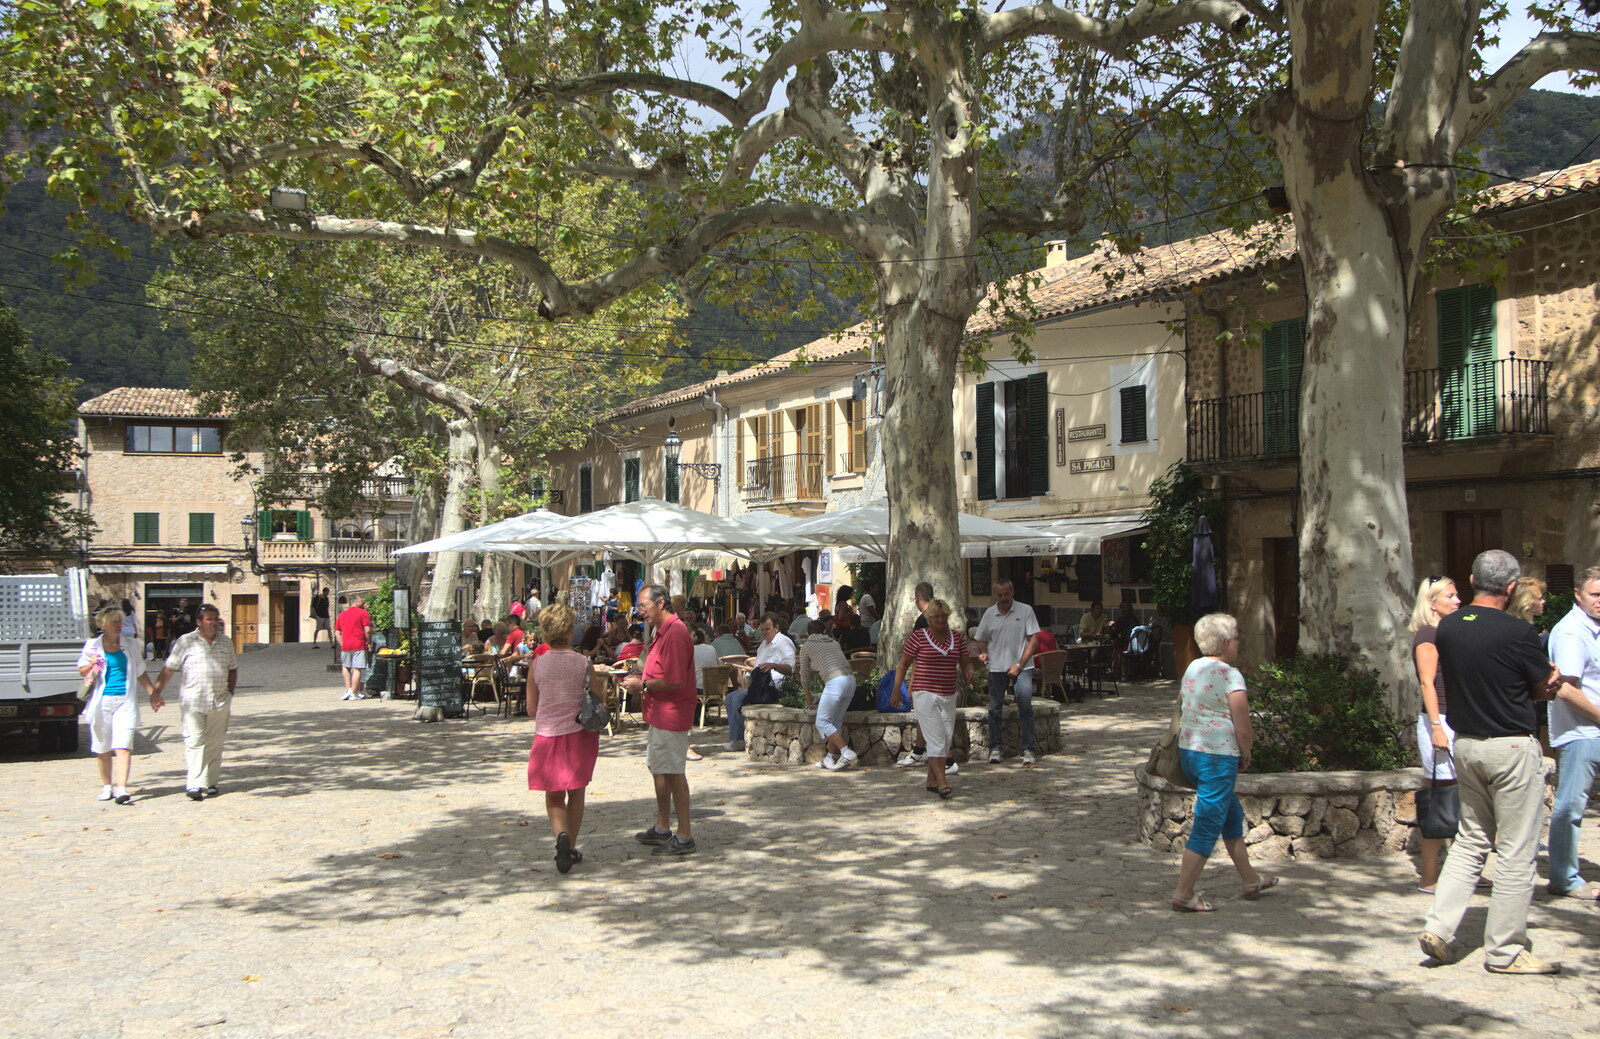 A tree-covered square from A Few Hours in Valdemossa, Mallorca, Spain - 13th September 2012